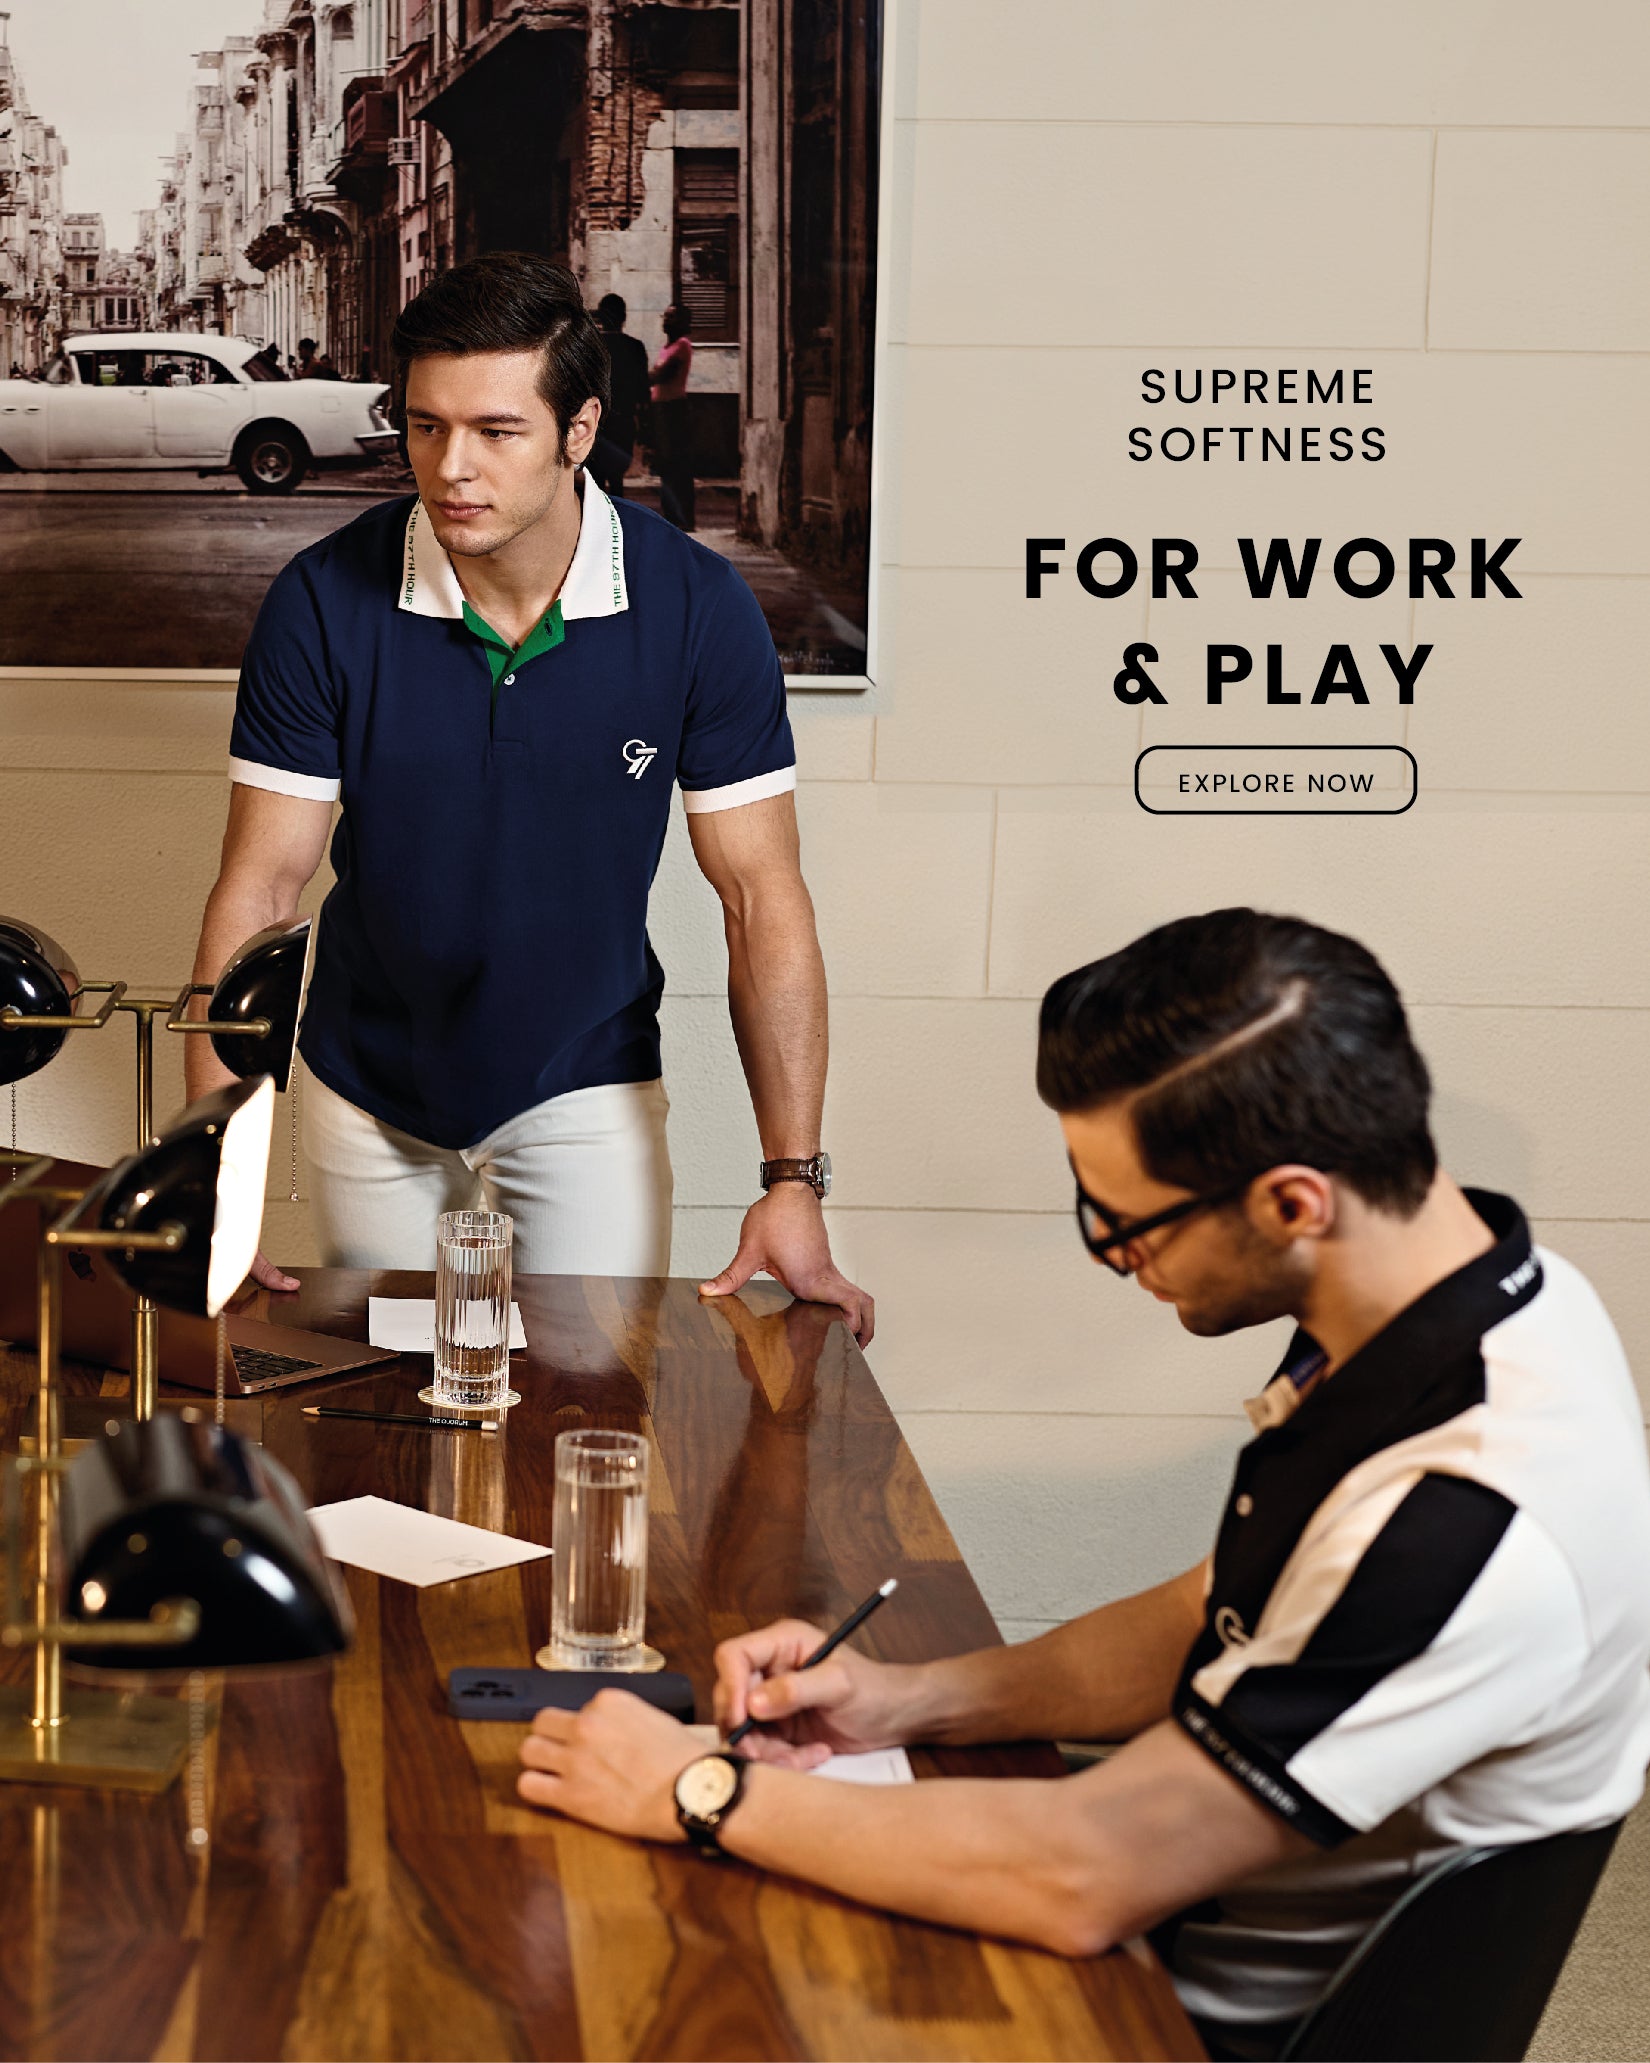 Check out Supreme Softness for Work & Play , Explore now